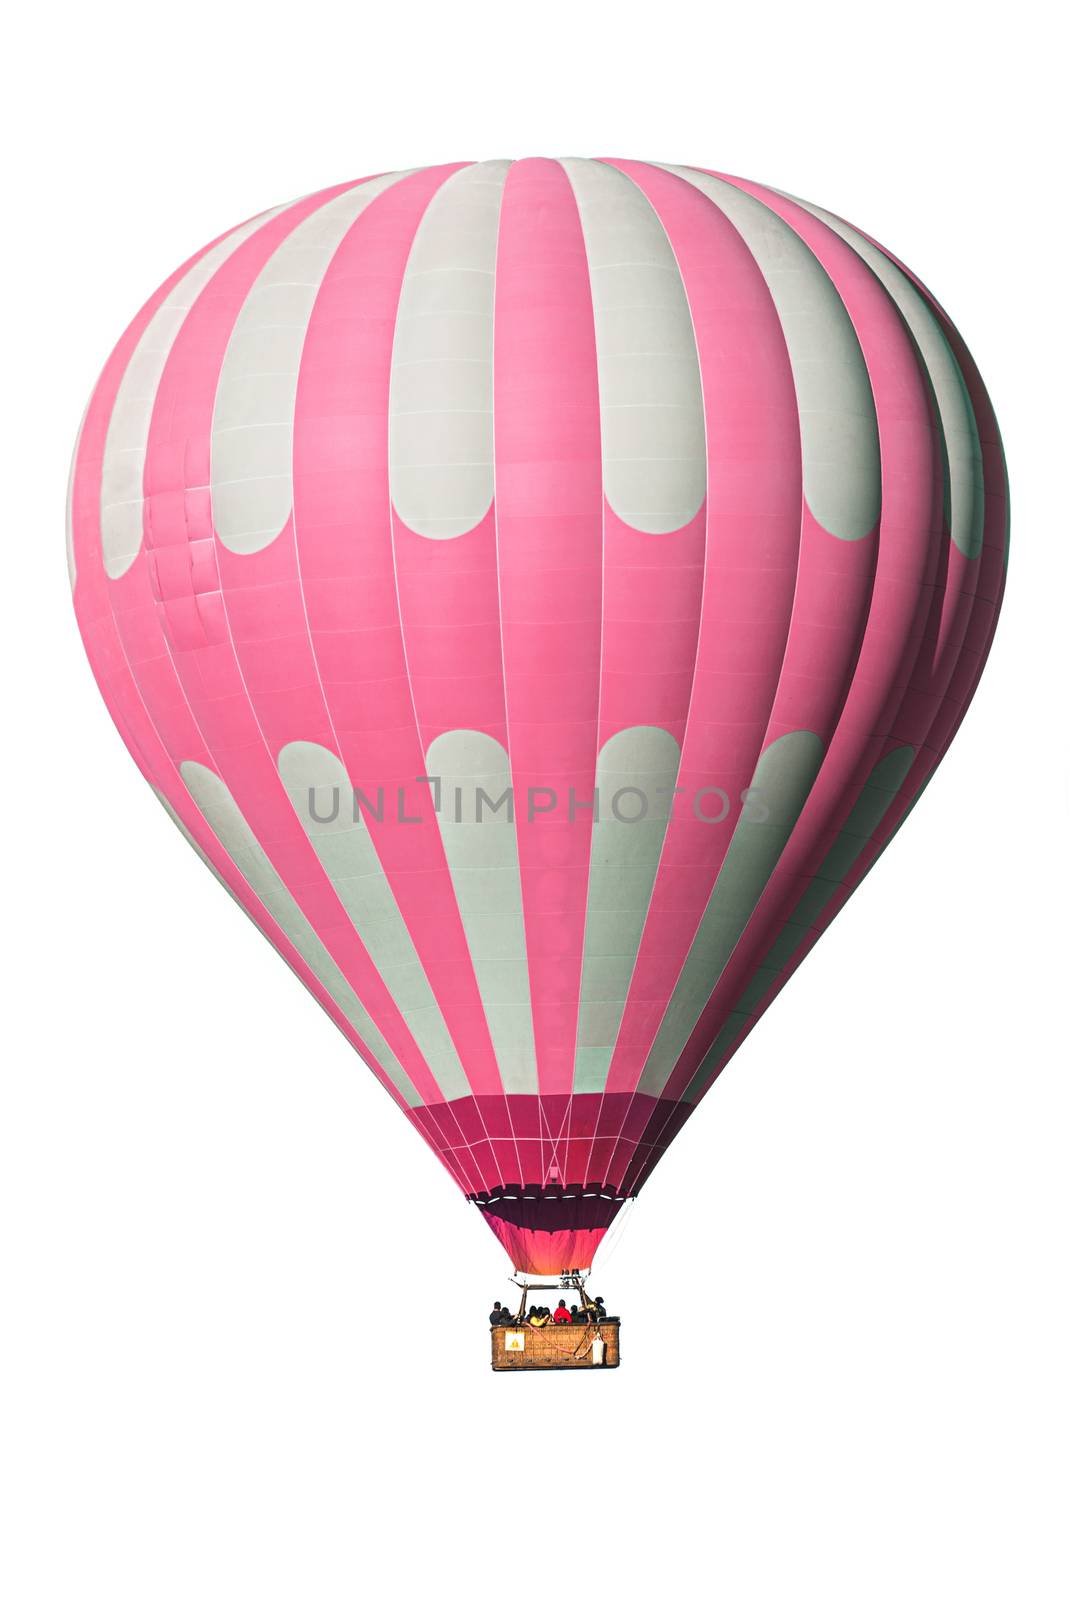 Pink and gray hot balloon  by fyletto